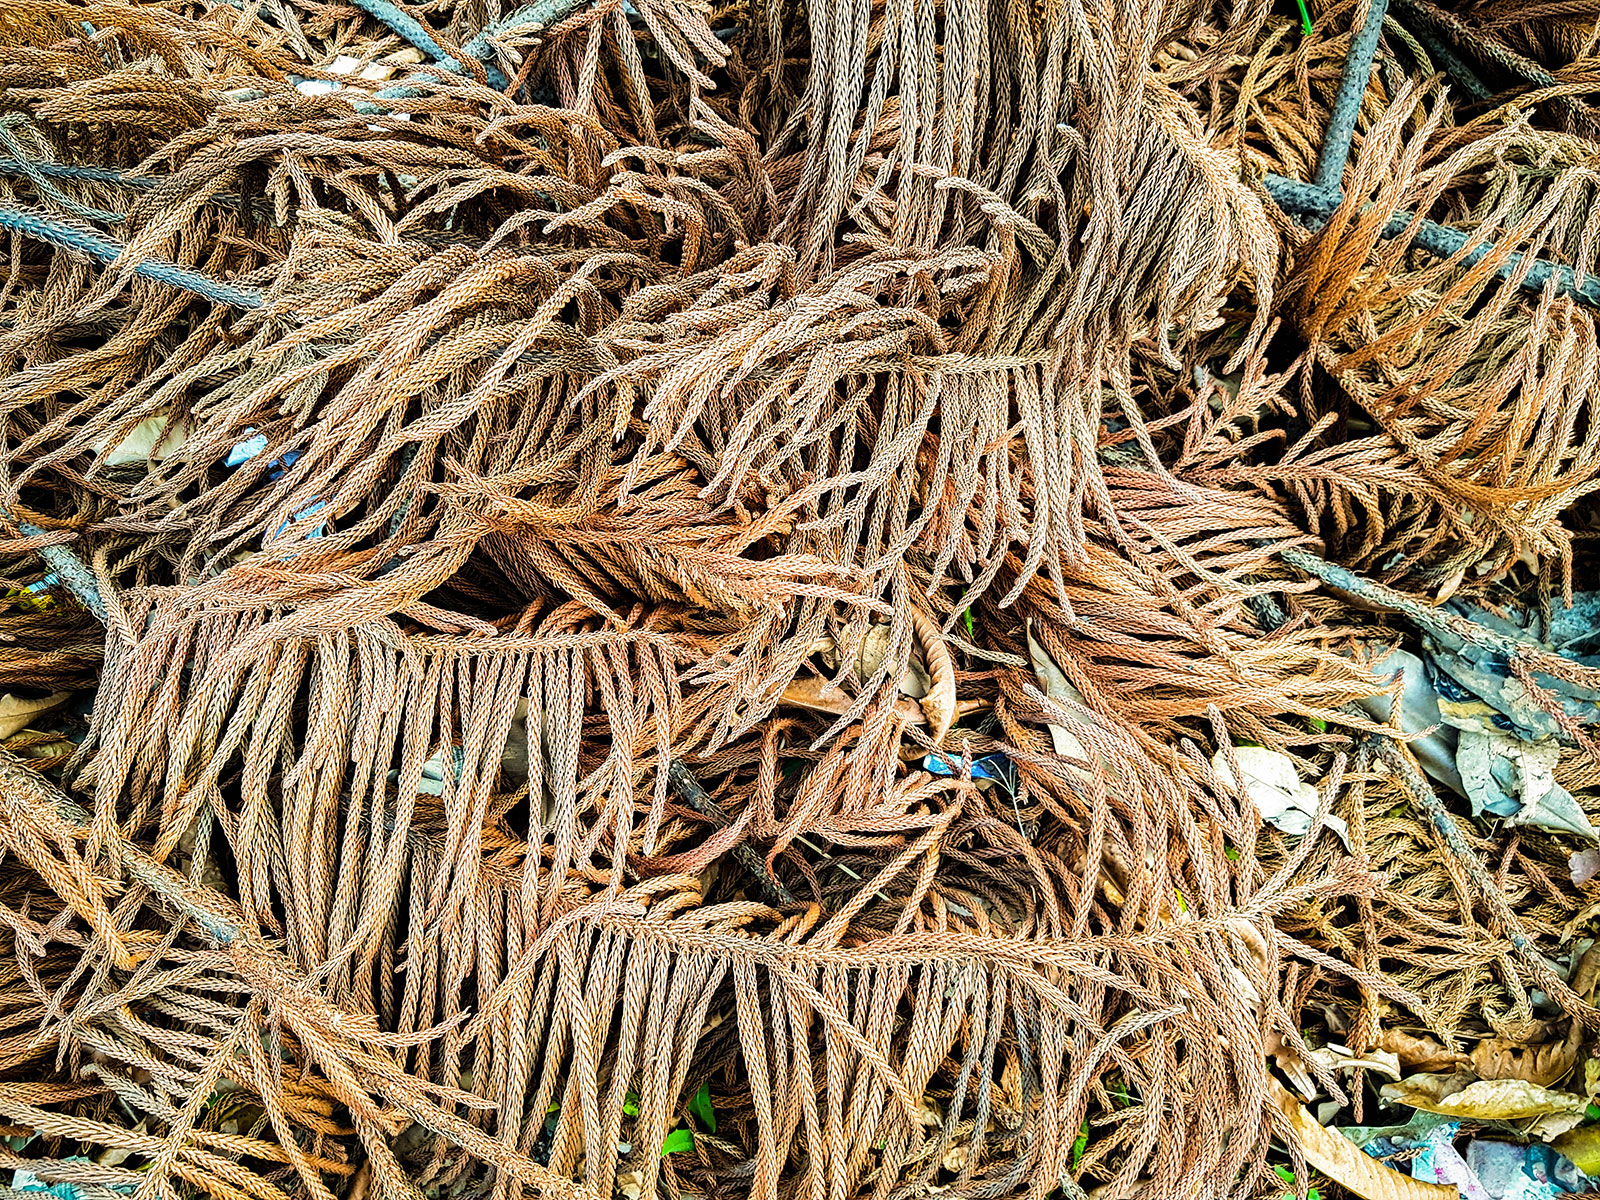 Dried-up needles from a Fraser fir tree